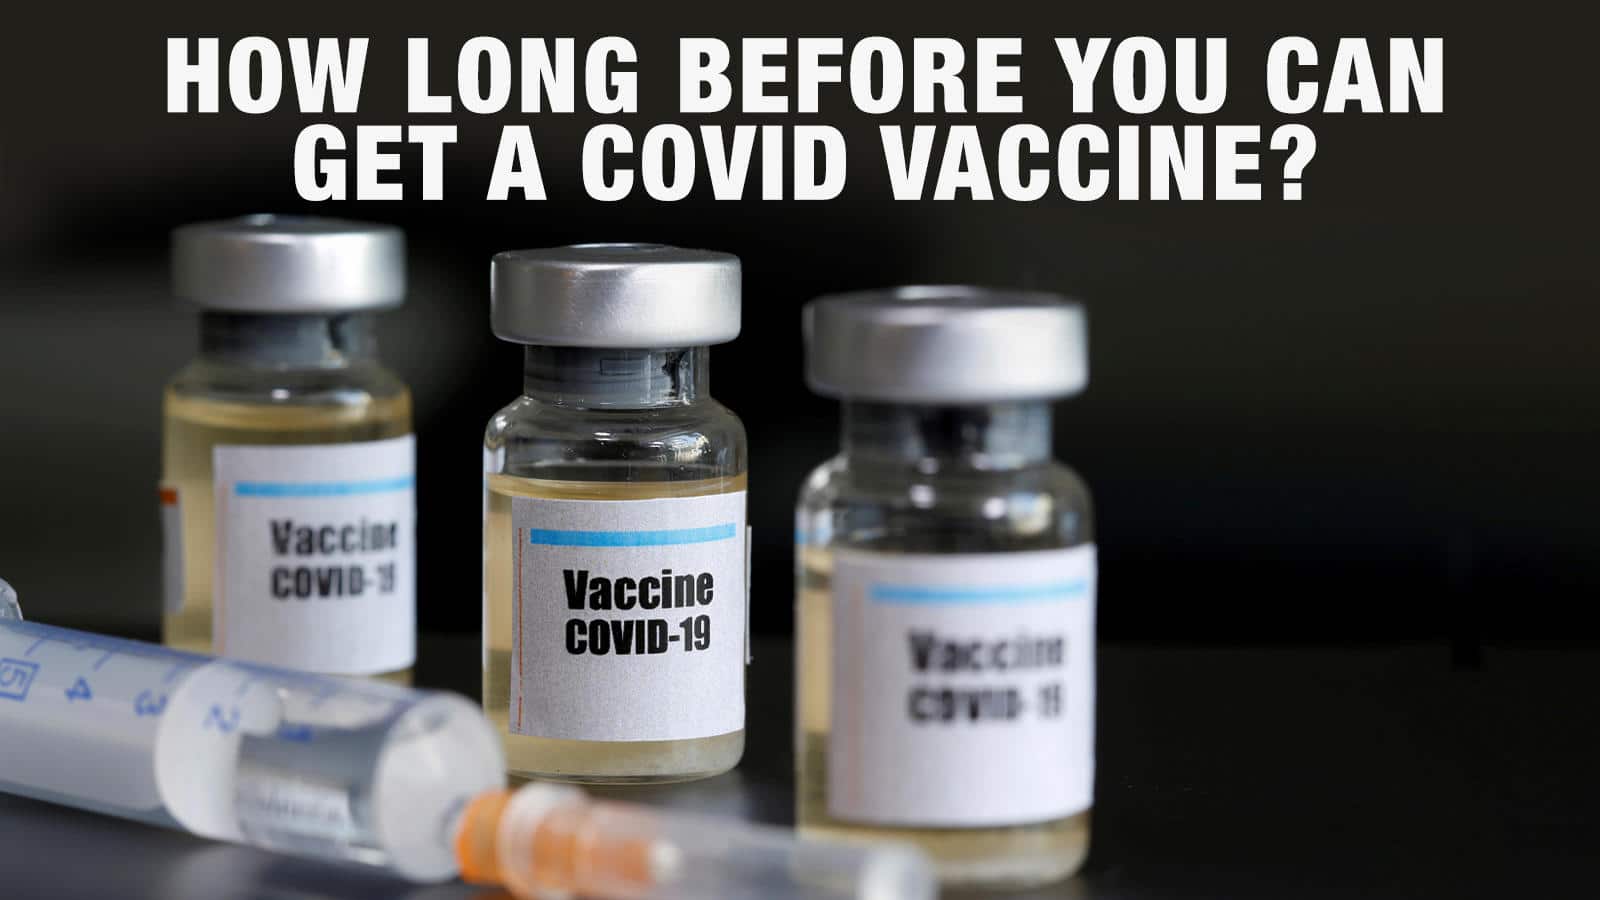 China Approves Human Testing for BioNTech’s COVID-19 Vaccine